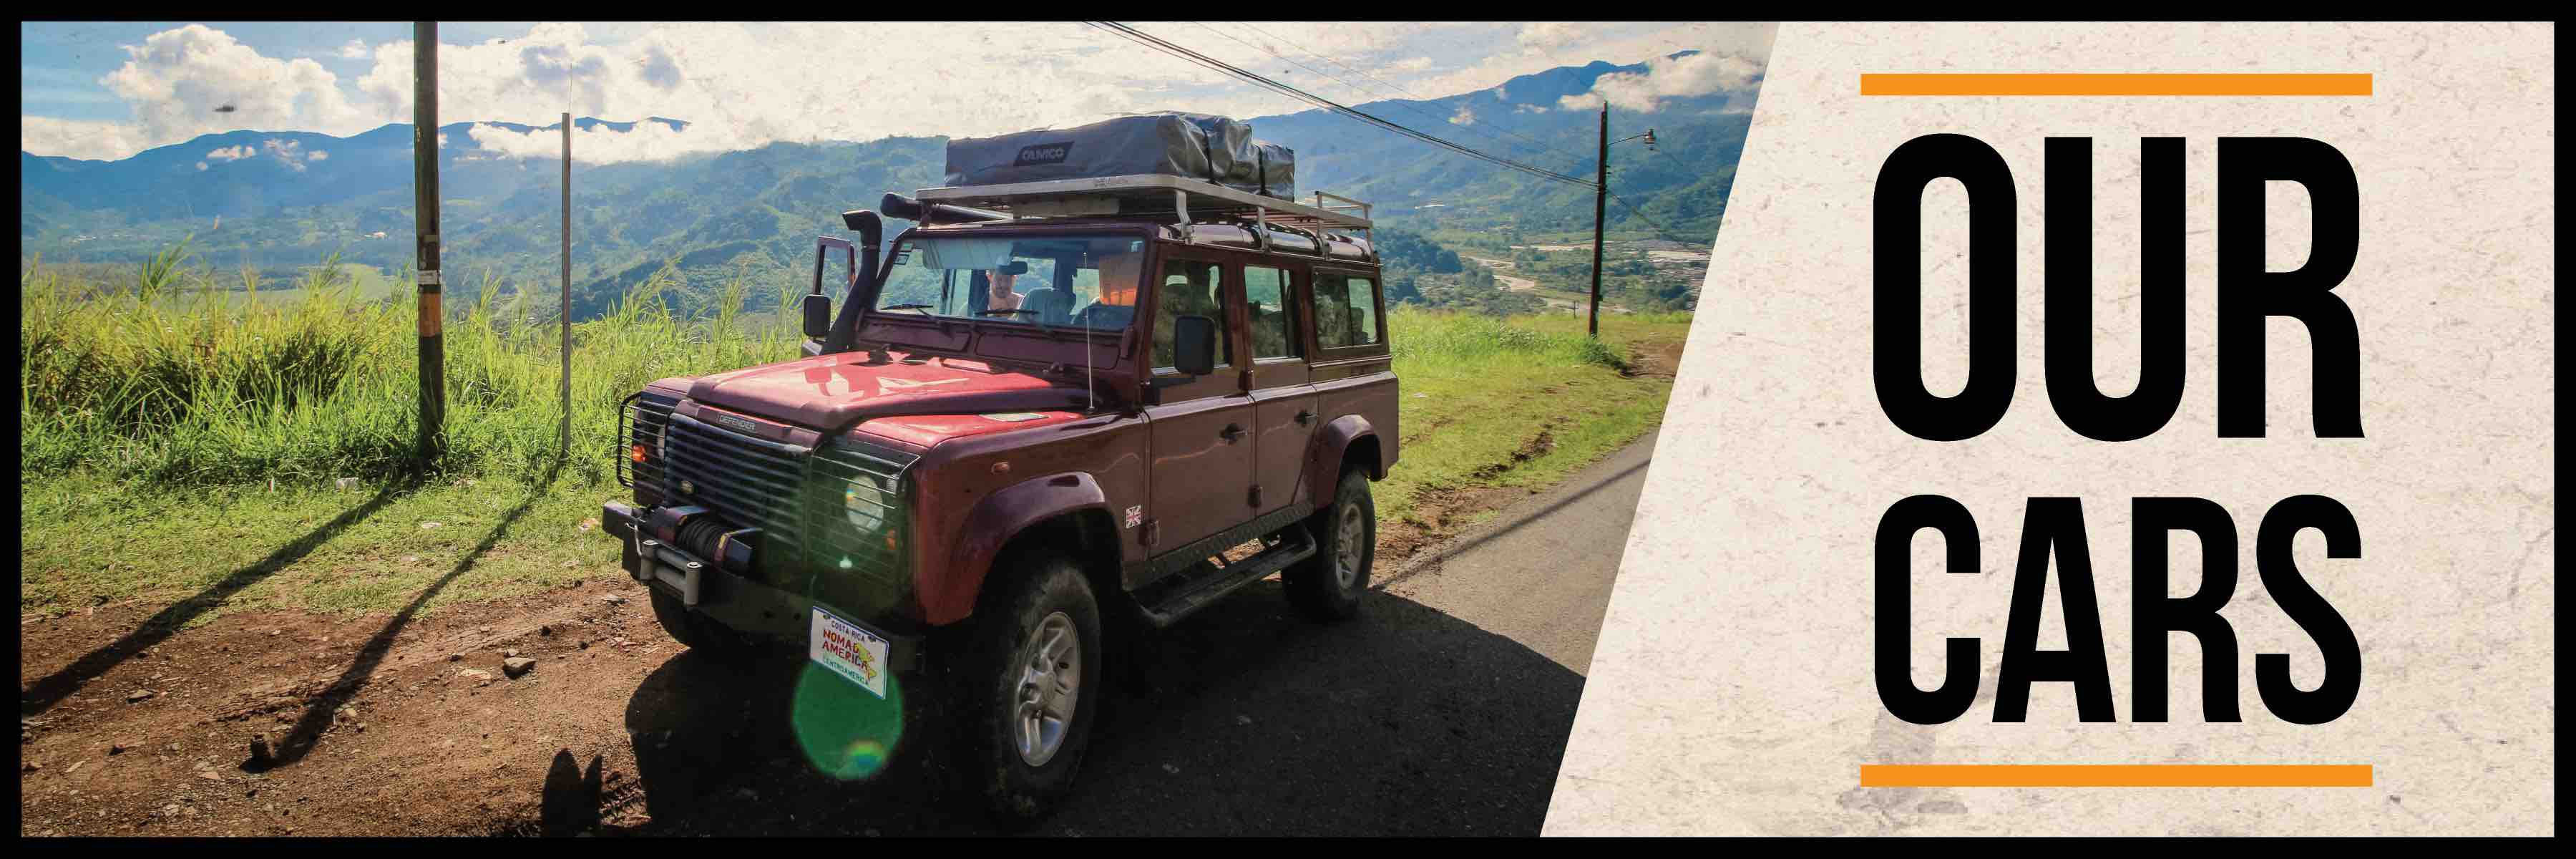 Best 4x4 rentals in Costa Rica - Land Cruisers - Land Rovers - Jeep Wranglers